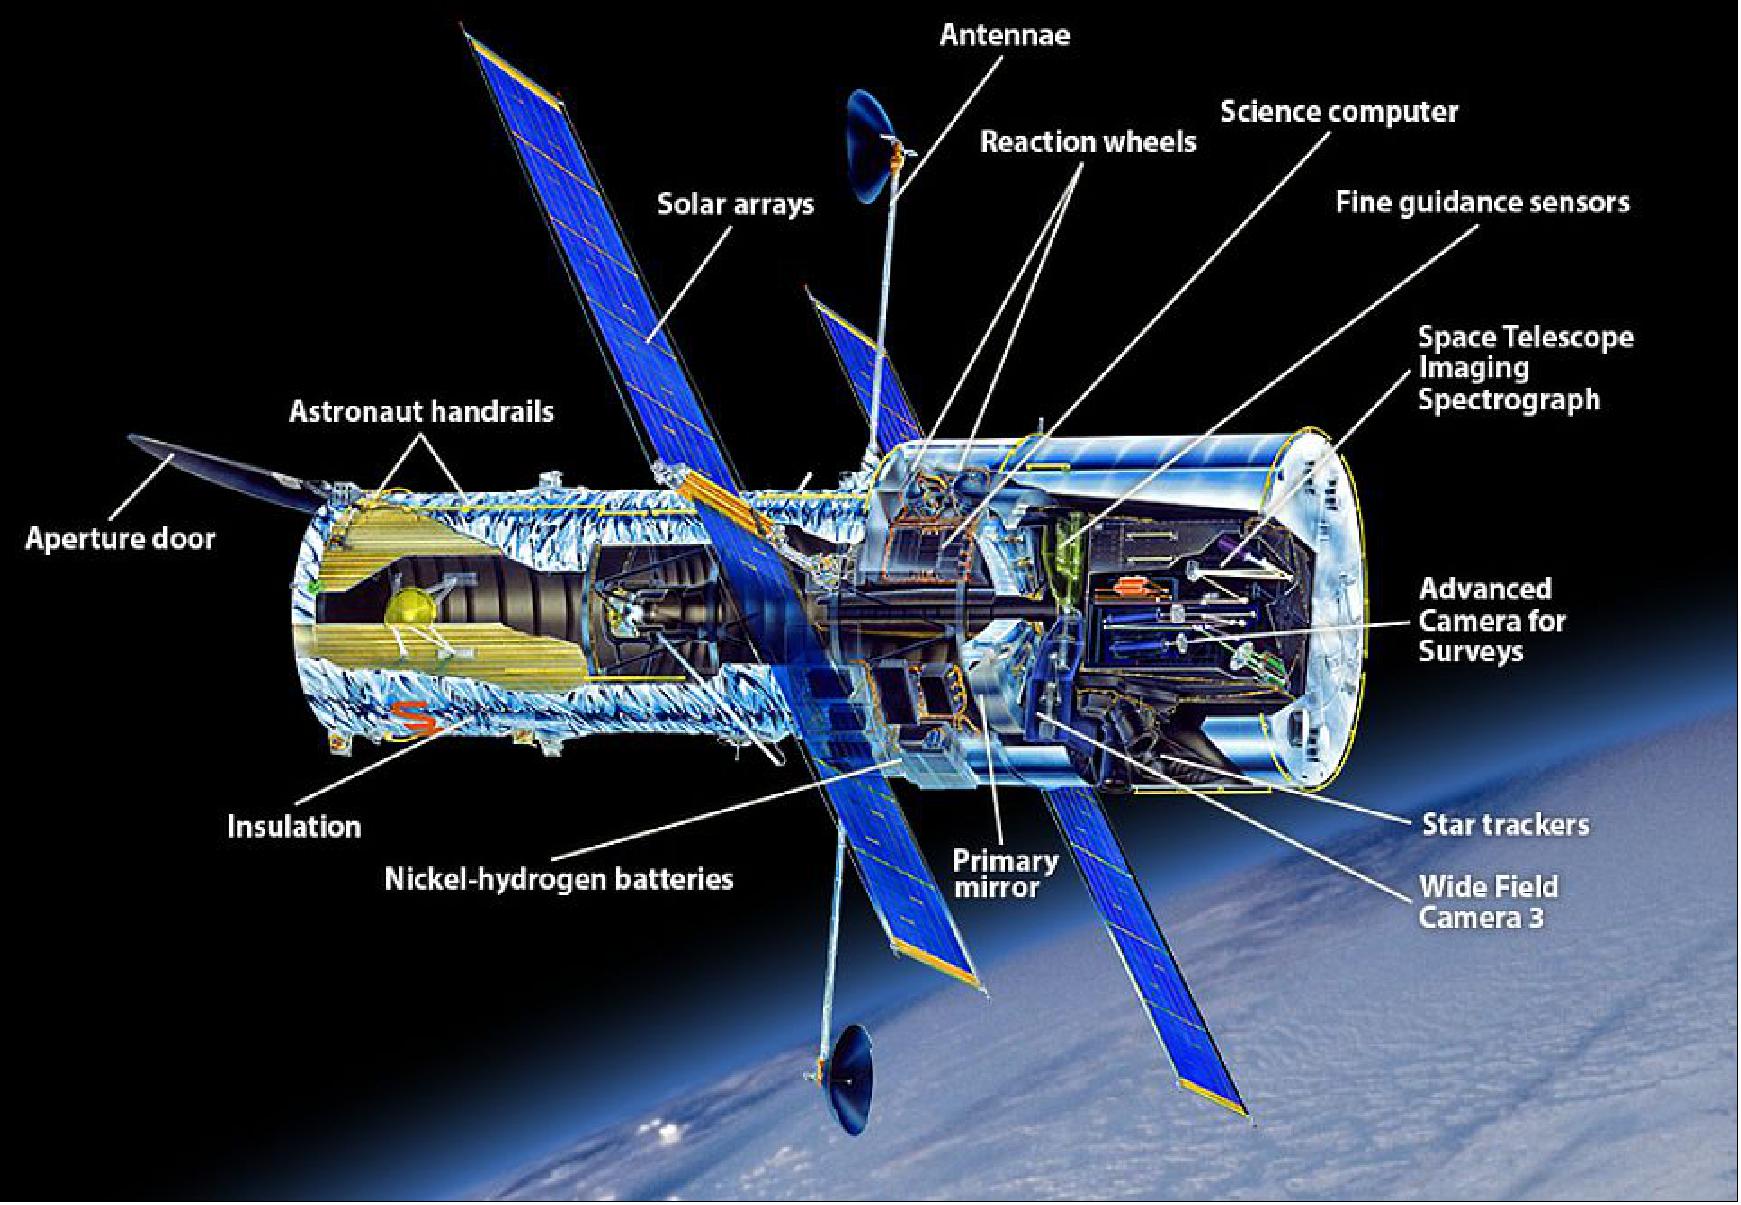 Figure 5: Artist's view of the HST in space along with the designation of the key element locations (image credit: NASA)